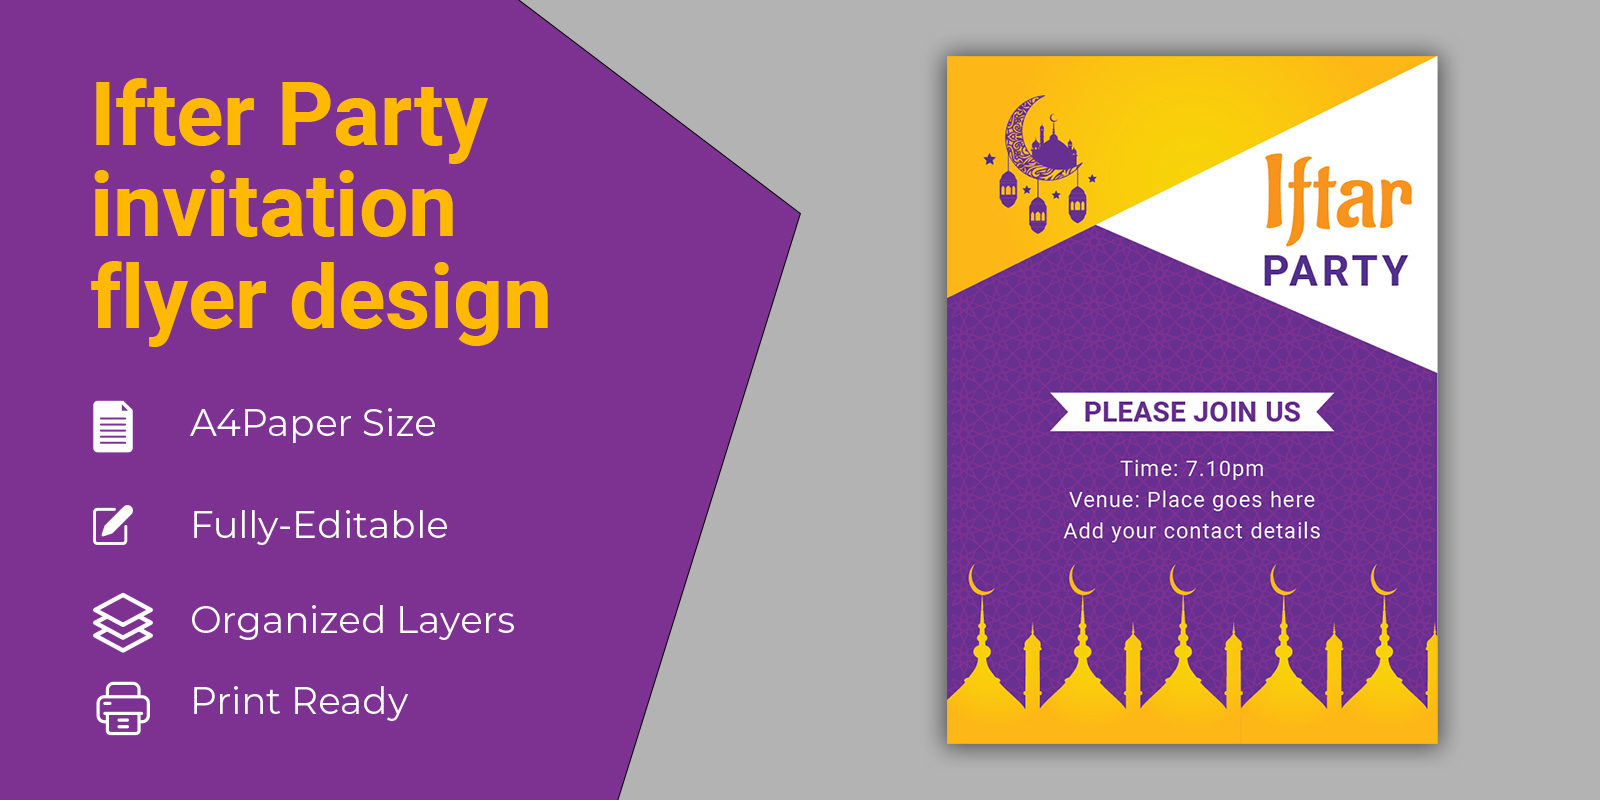 Iftar Party Celebration Flyer Design - Corporate Identity Template